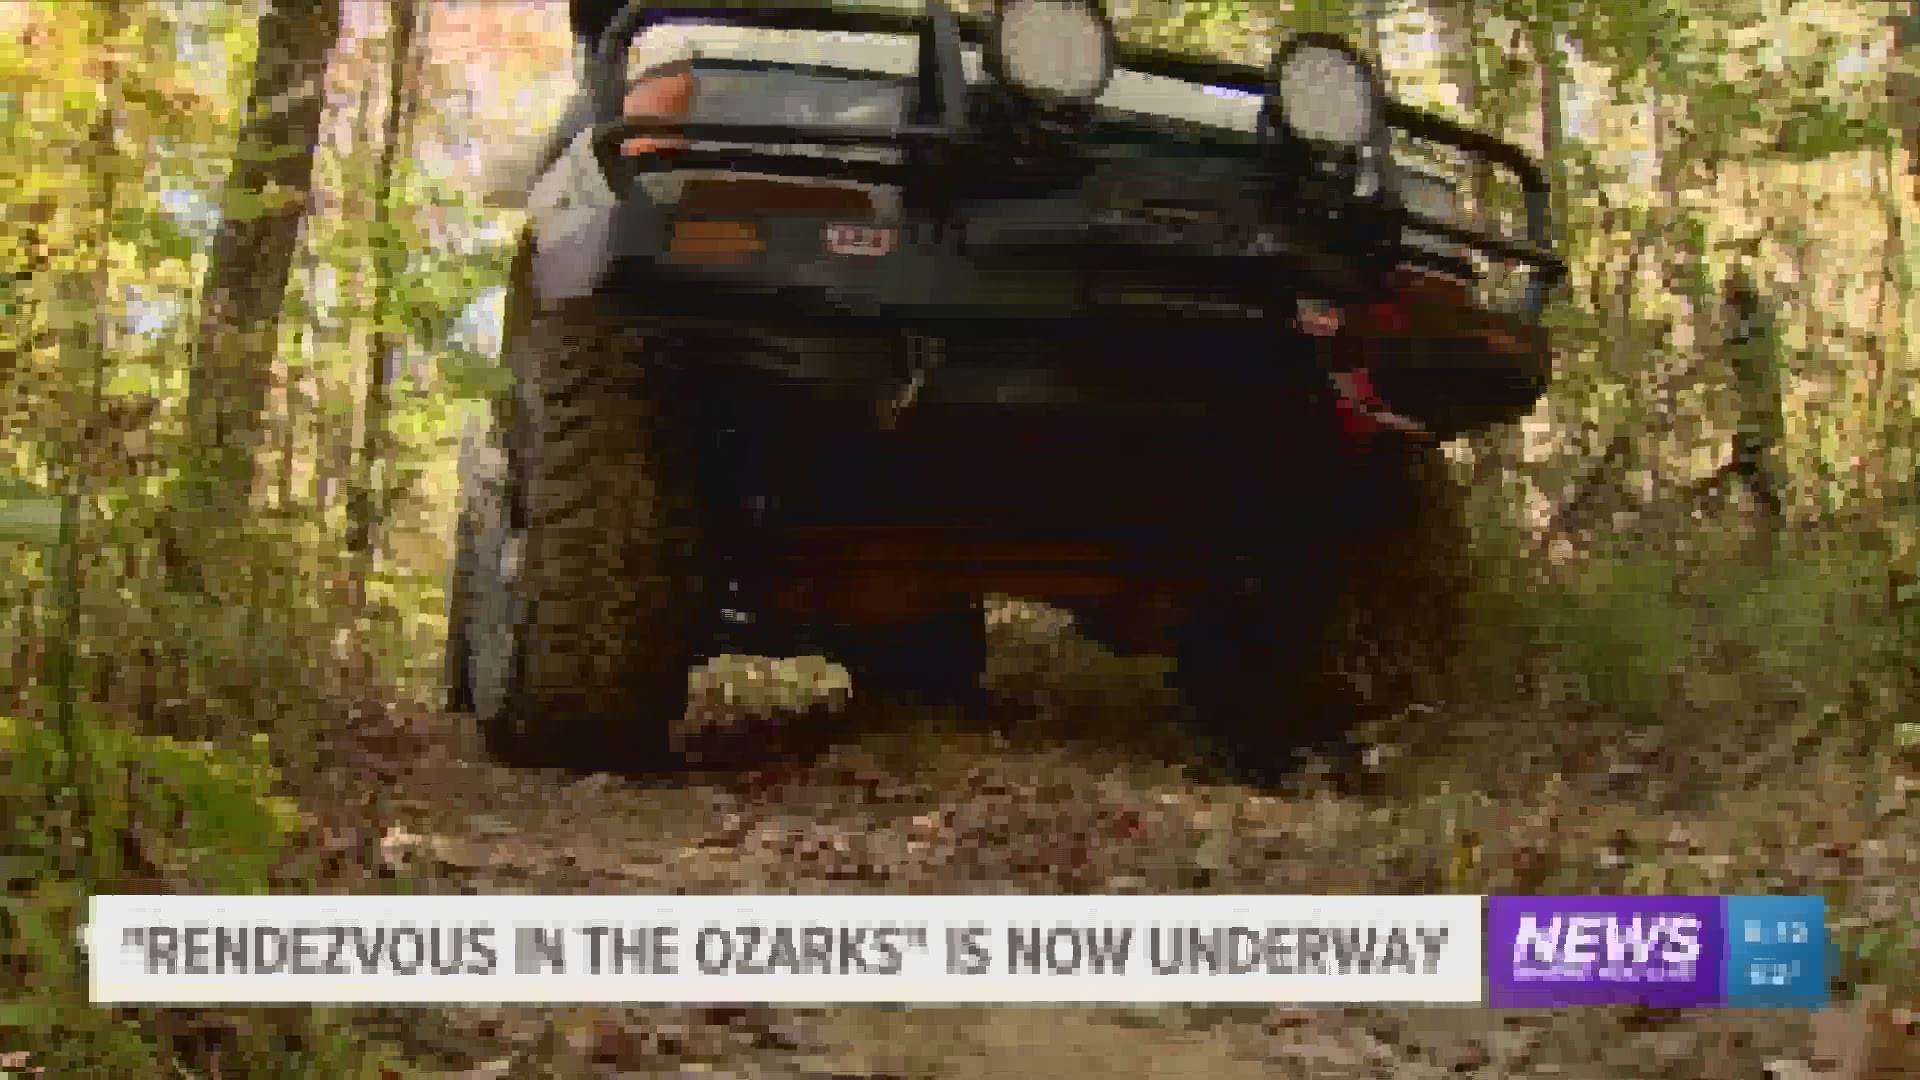 People from all over the country came to experience the beautiful Ozark Mountains of Arkansas.